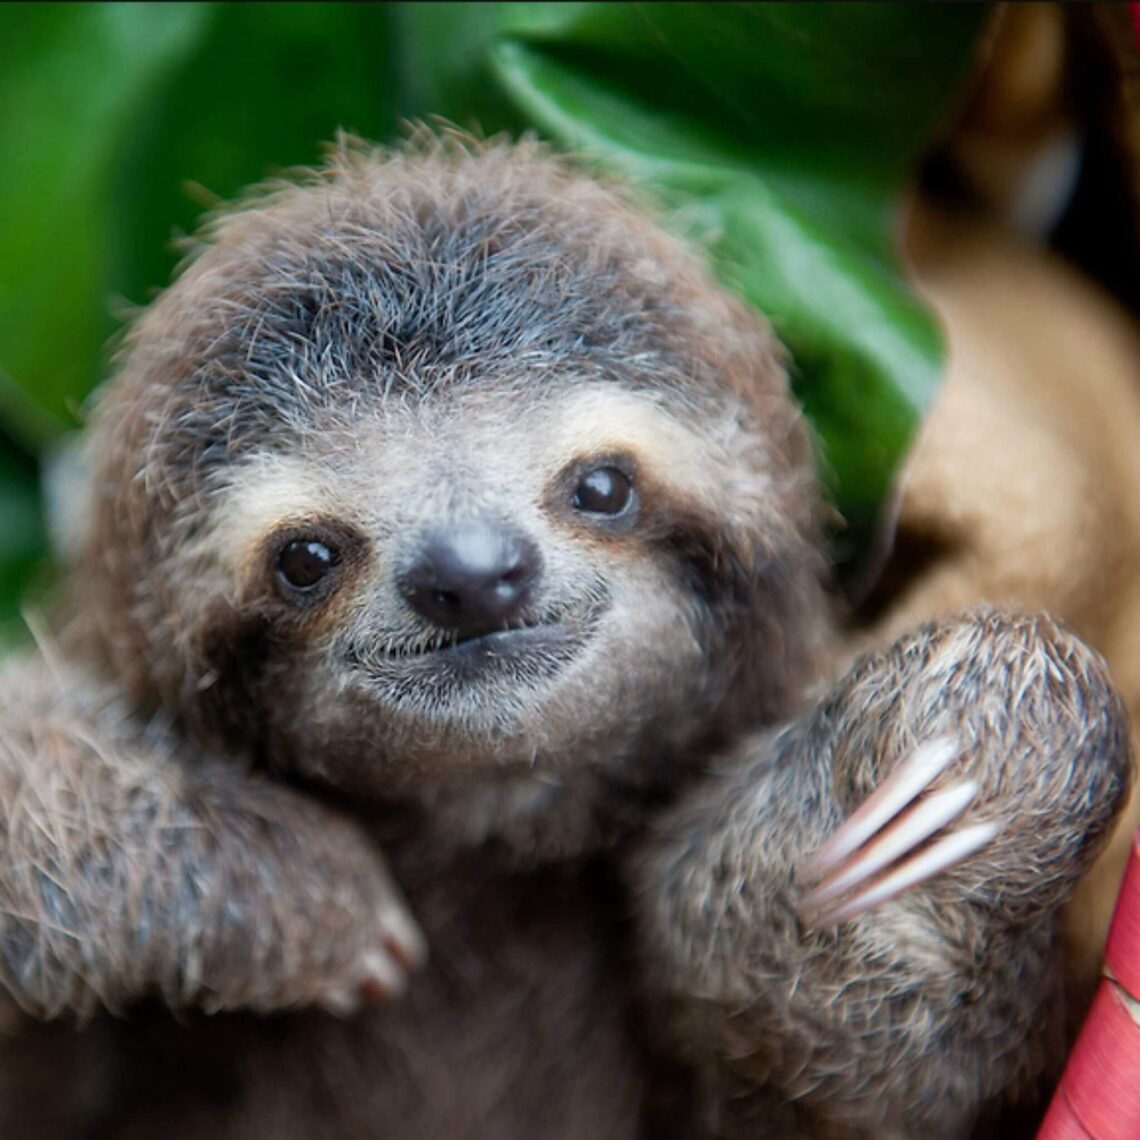 48 Cute Sloth Pictures That Will Make You Squeal with Delight!